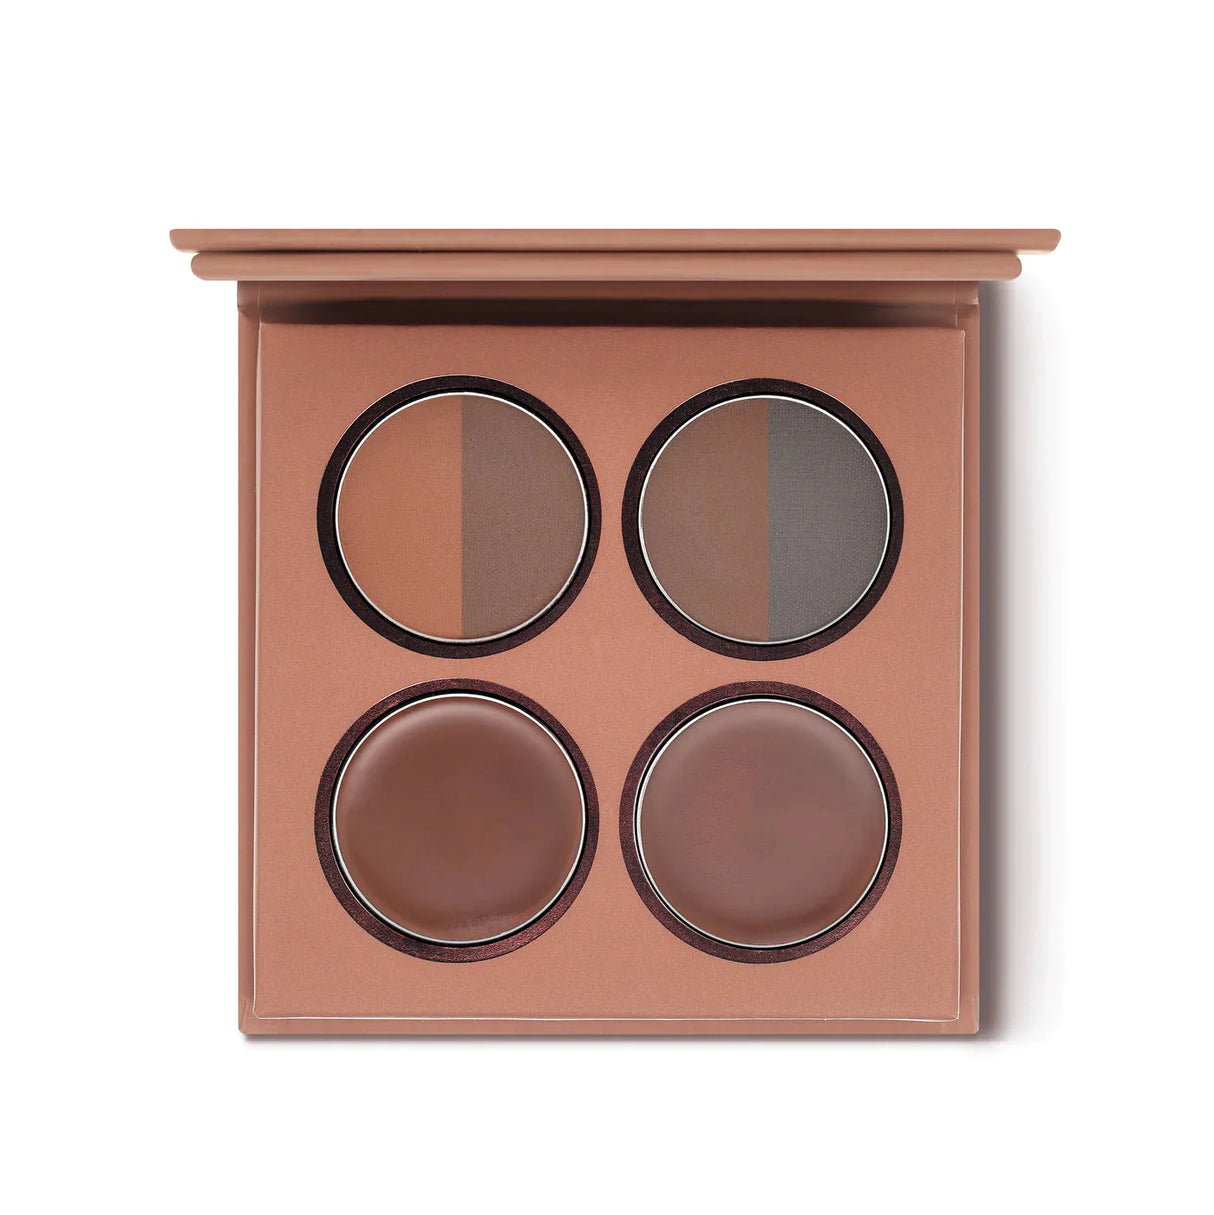 BETTER BROWS Mini Eyebrow Palette Find Your New Look Today!